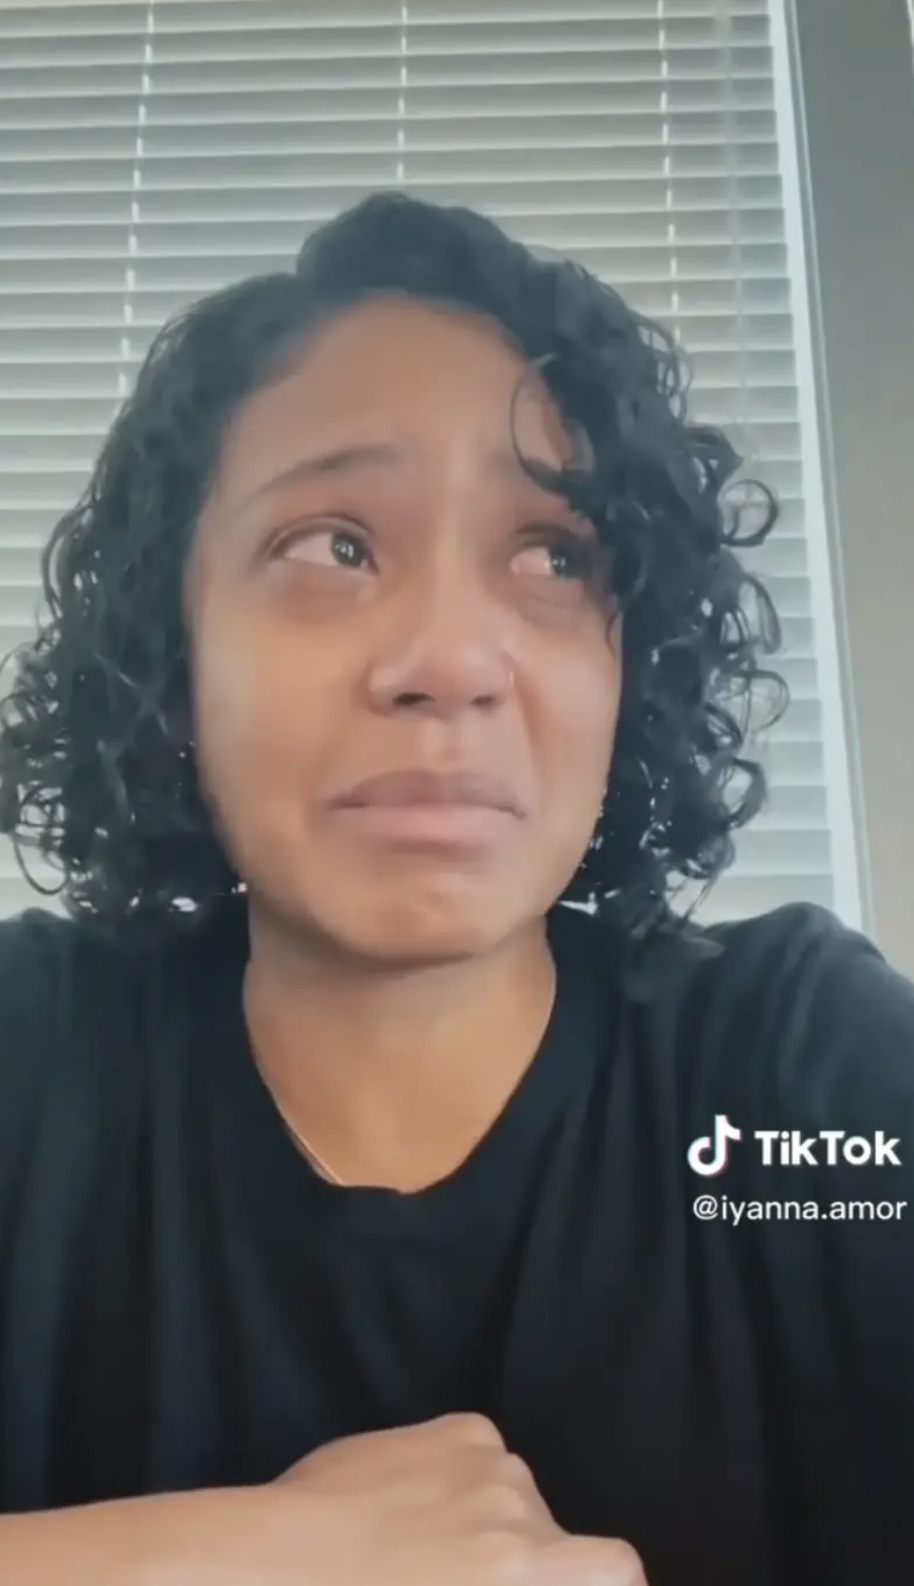 Iyanna McNeely  looks emotional, wearing a t-shirt, with TikTok handle @iyanna.amor visible